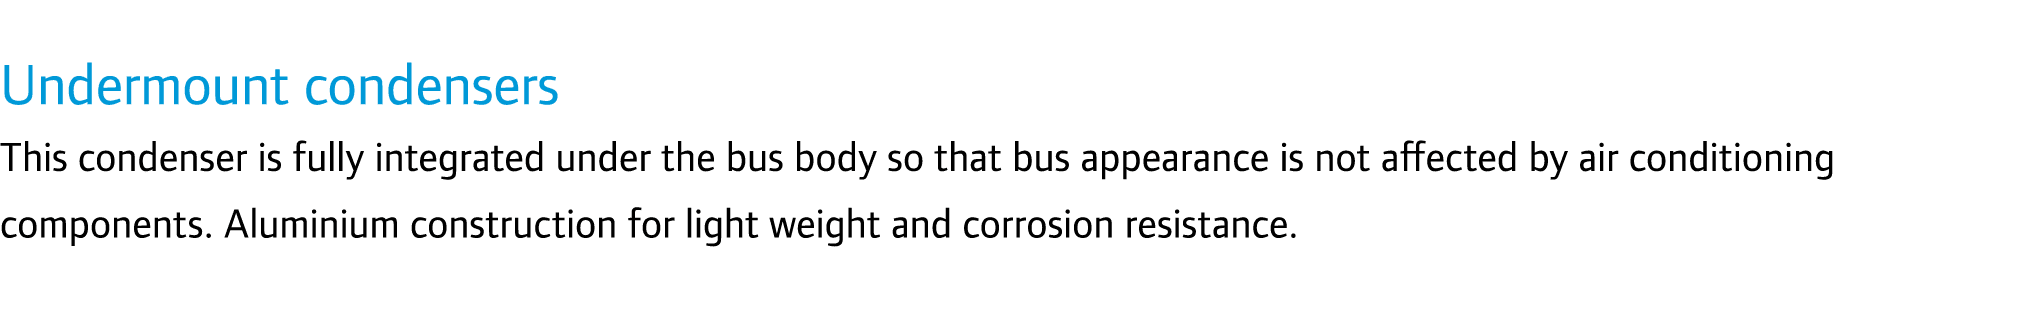 Undermount condensers This condenser is fully integrated under the bus body so that bus appearance is not affected by...